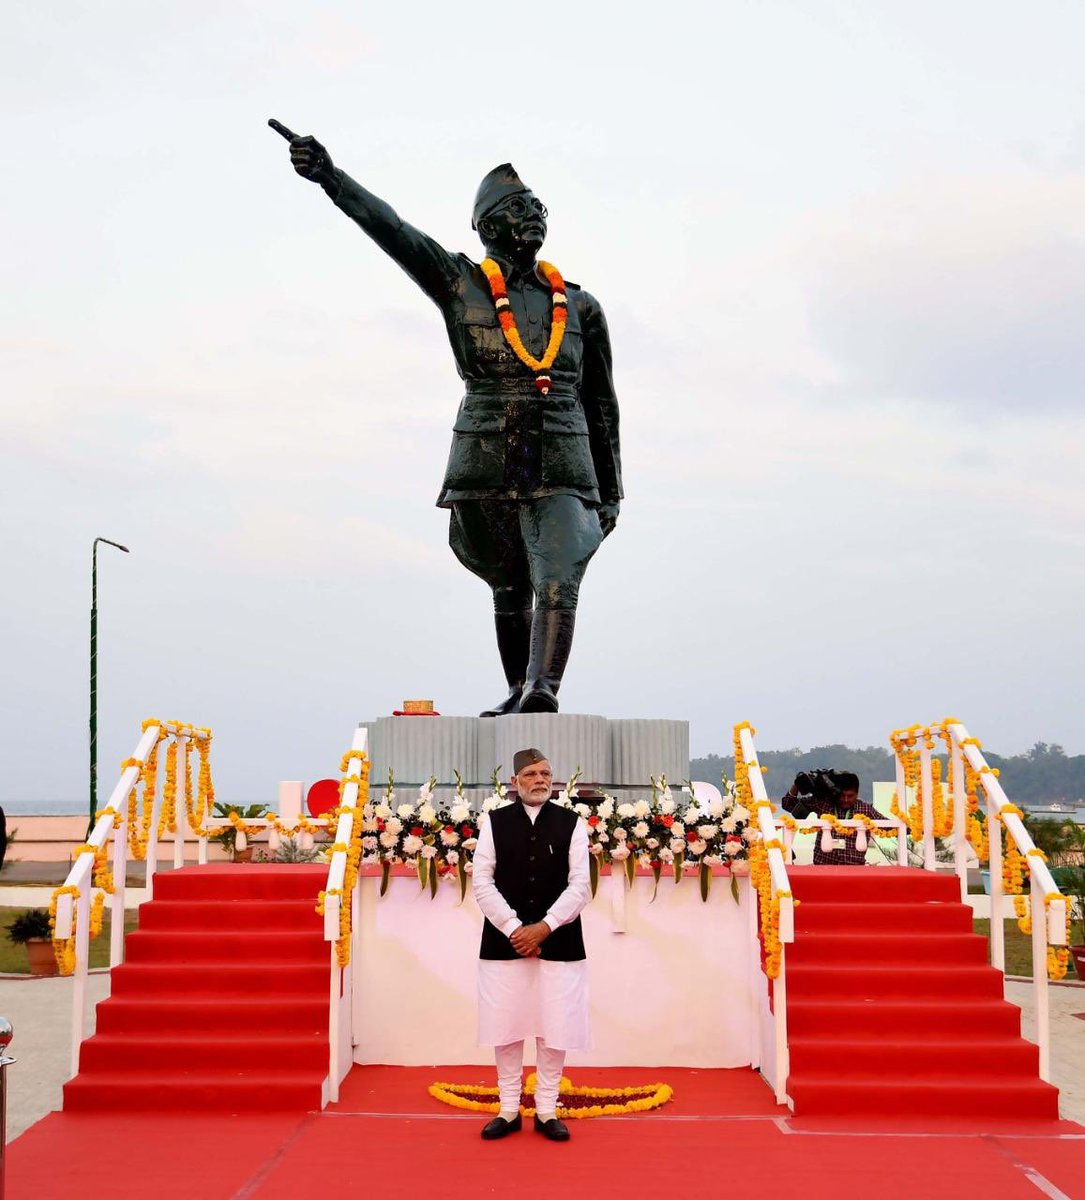 Narendra Modi 30th December 1943 A Day Etched In The Memory Of Every Indian When The Brave Netaji Subhas Bose Unfurled The Tricolour At Port Blair To Mark The 75th Anniversary